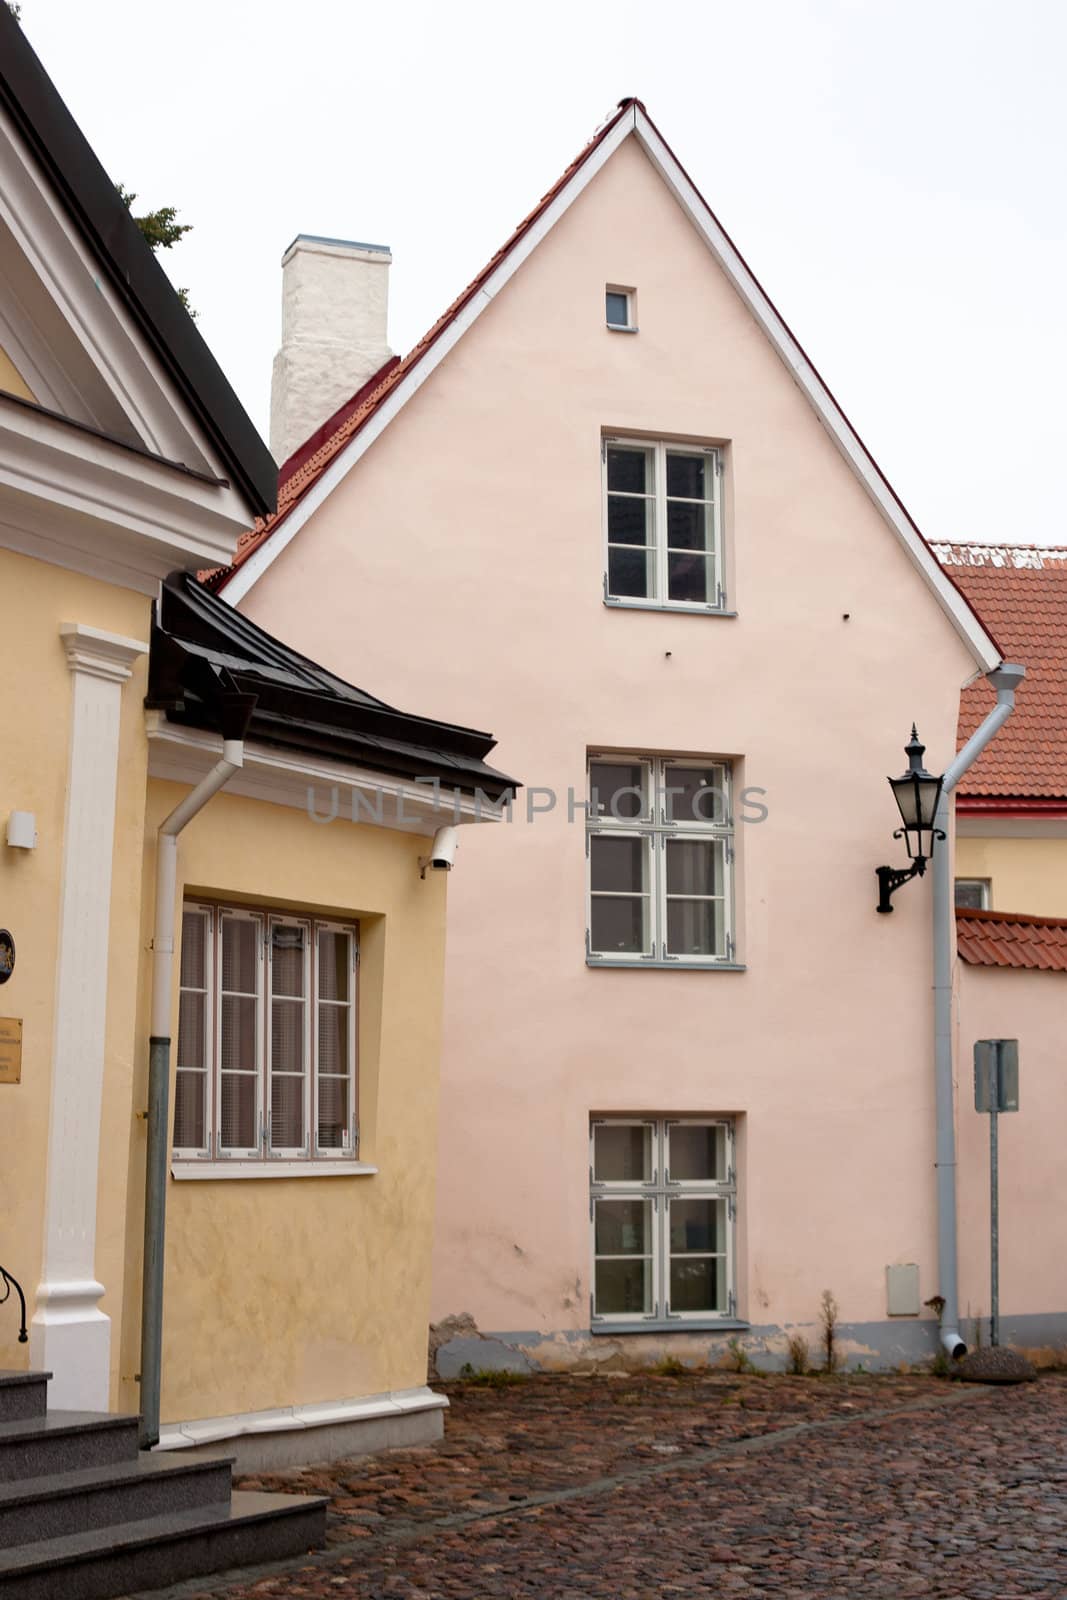 Old pink and yellow buildings in Tallinn
